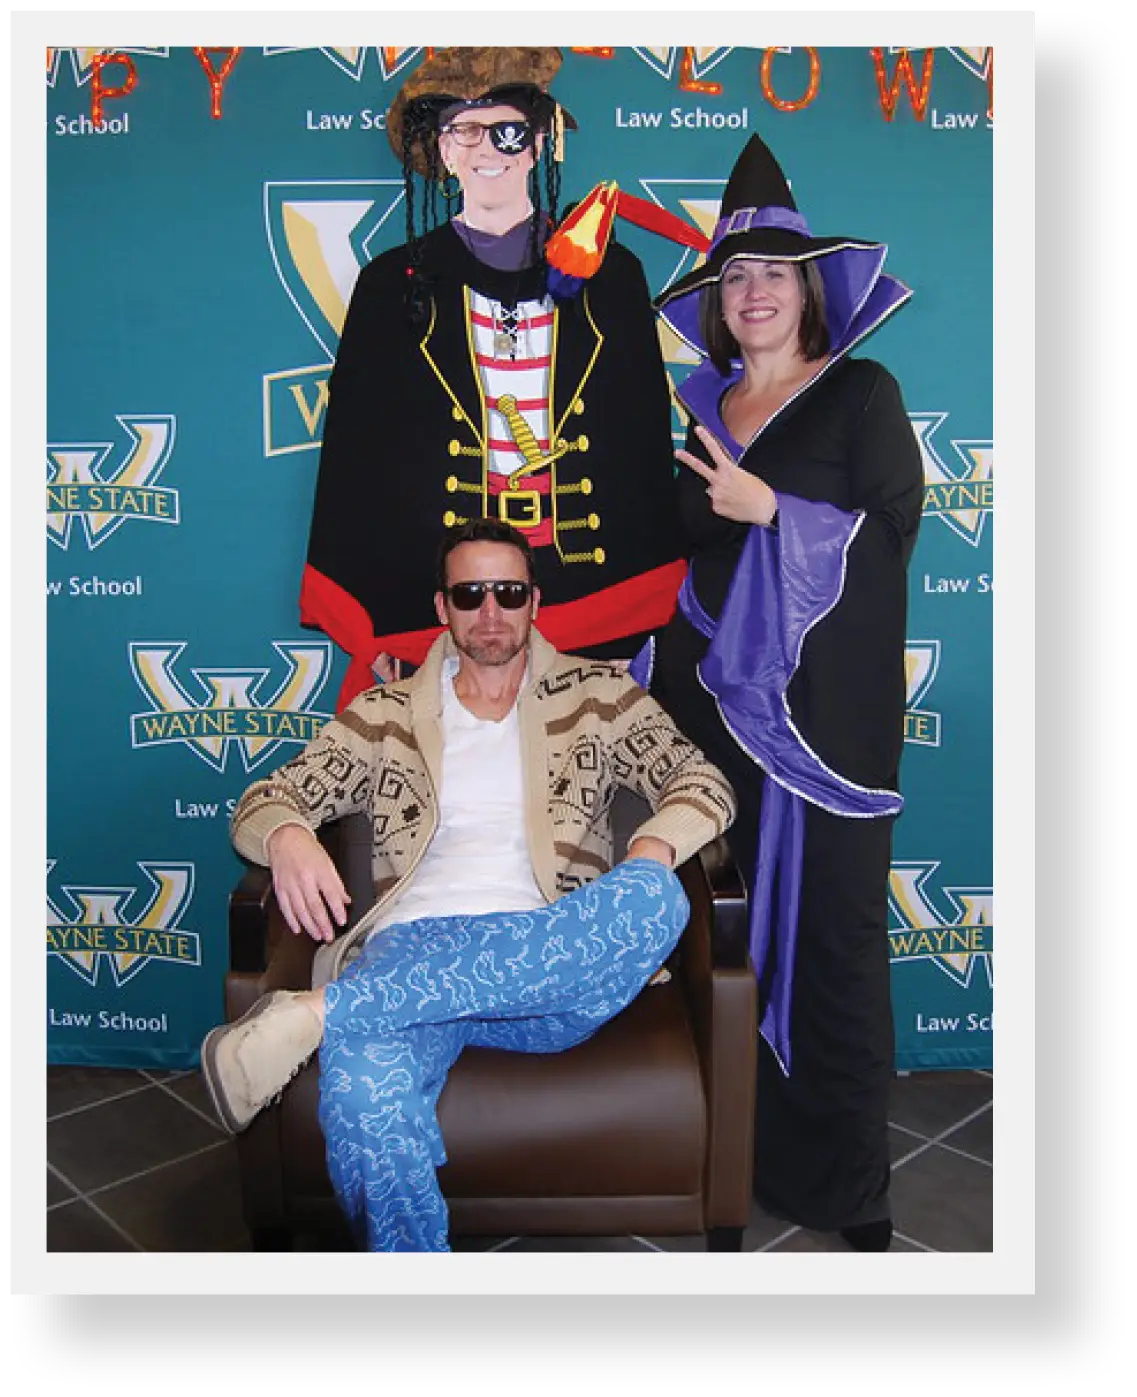 Two faculty members posing for picture during halloween party dressed in halloween costumes